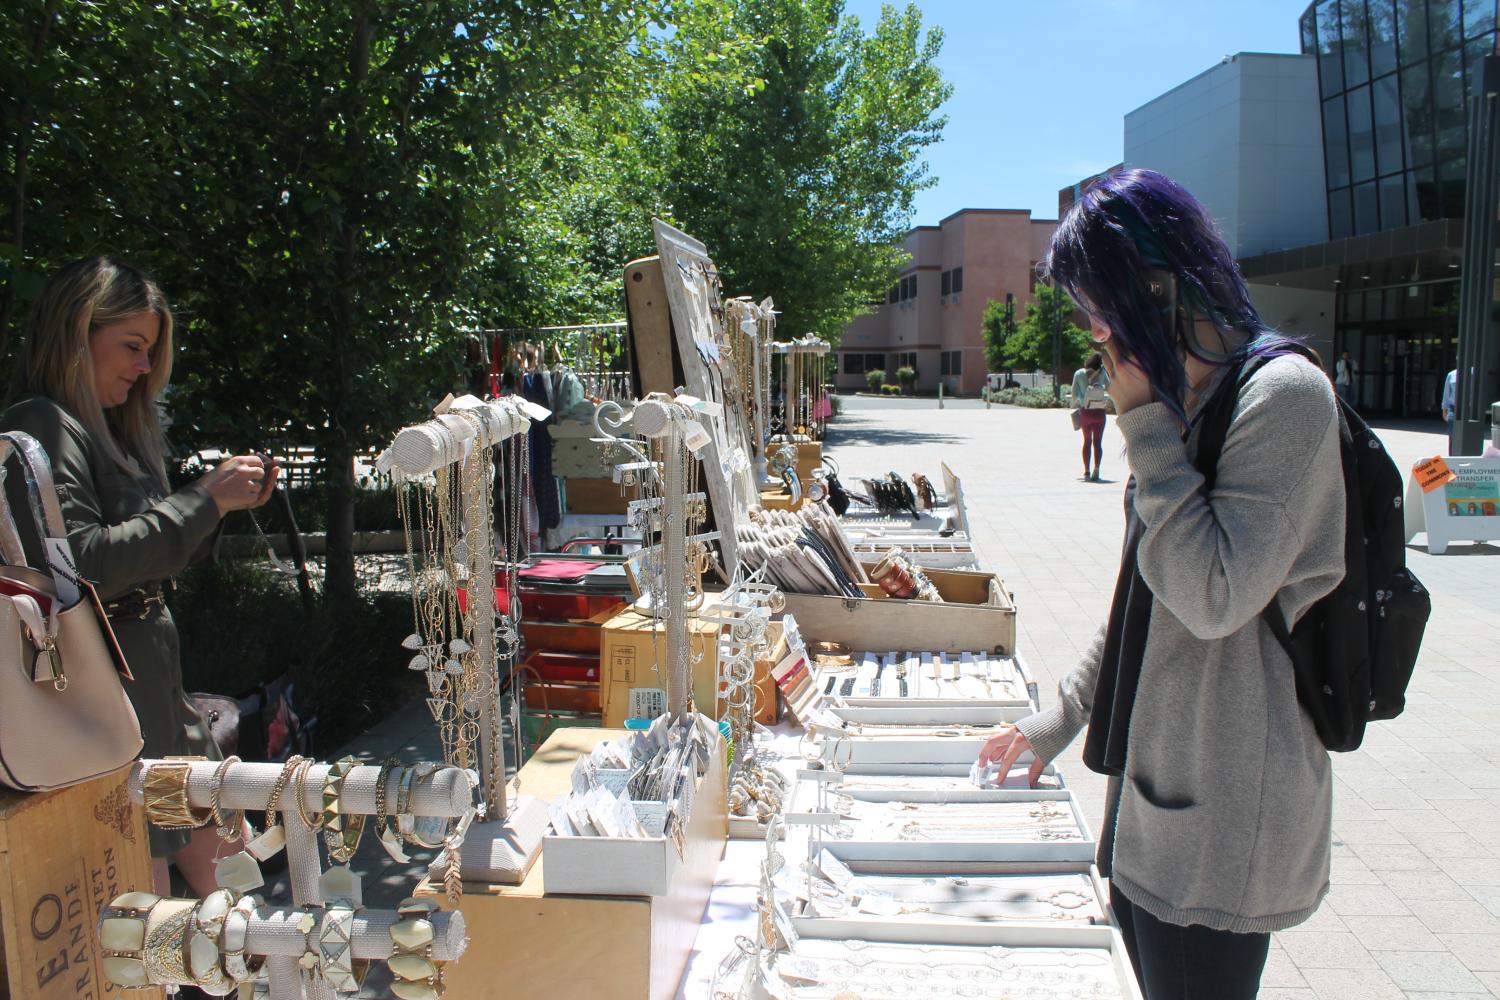 A student looks at jewelry for sale from Suz and Bex on the DVC campus on April 27, 2017.